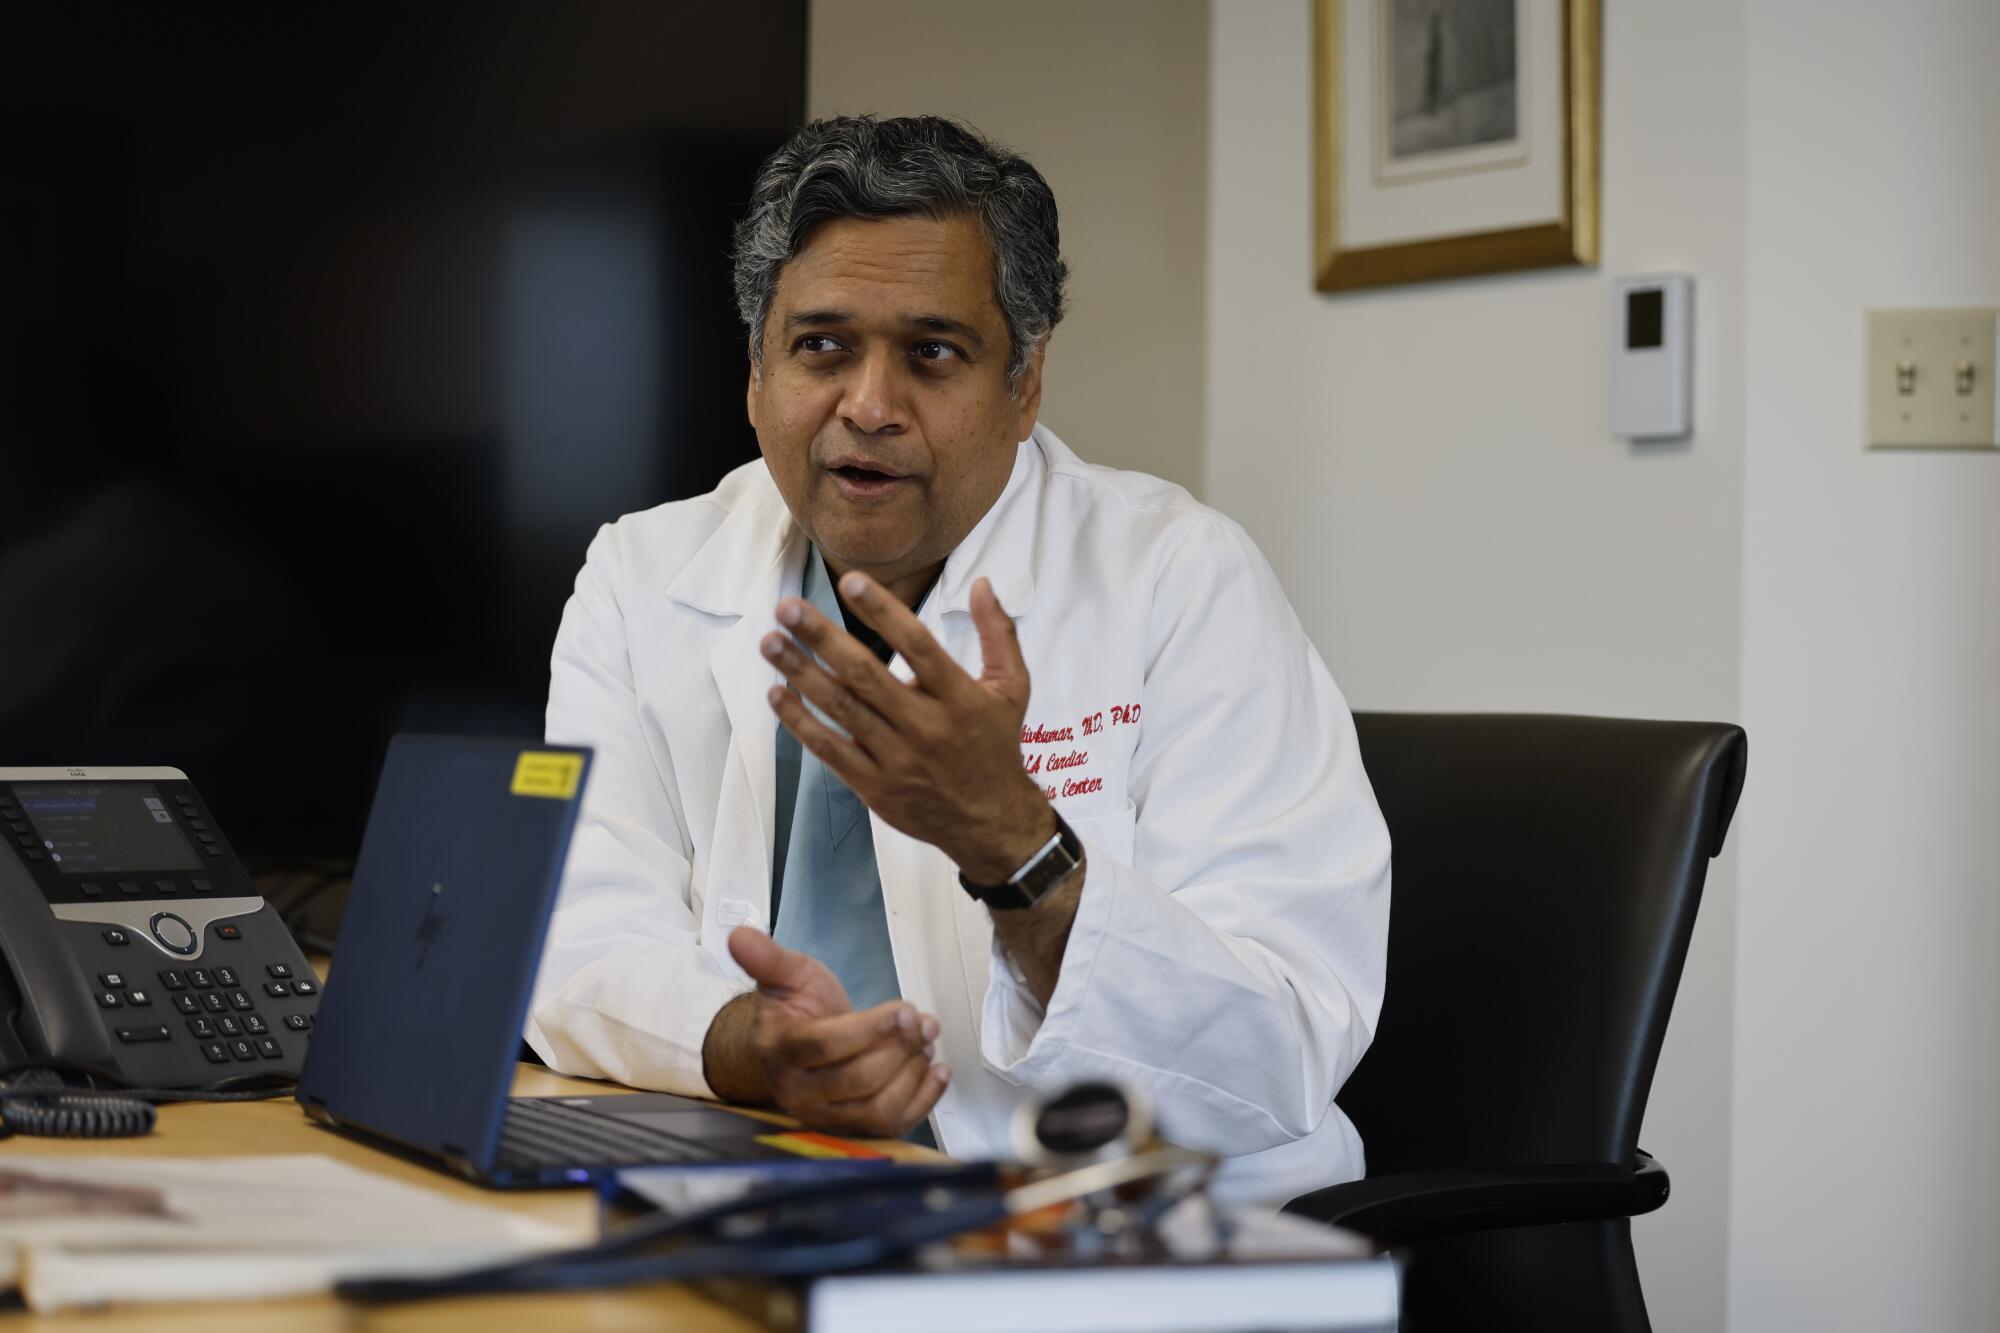 Dr. Kalyanam Shivkumar, wearing a lab coat and sitting behind an open laptop computer, gestures as he speaks.